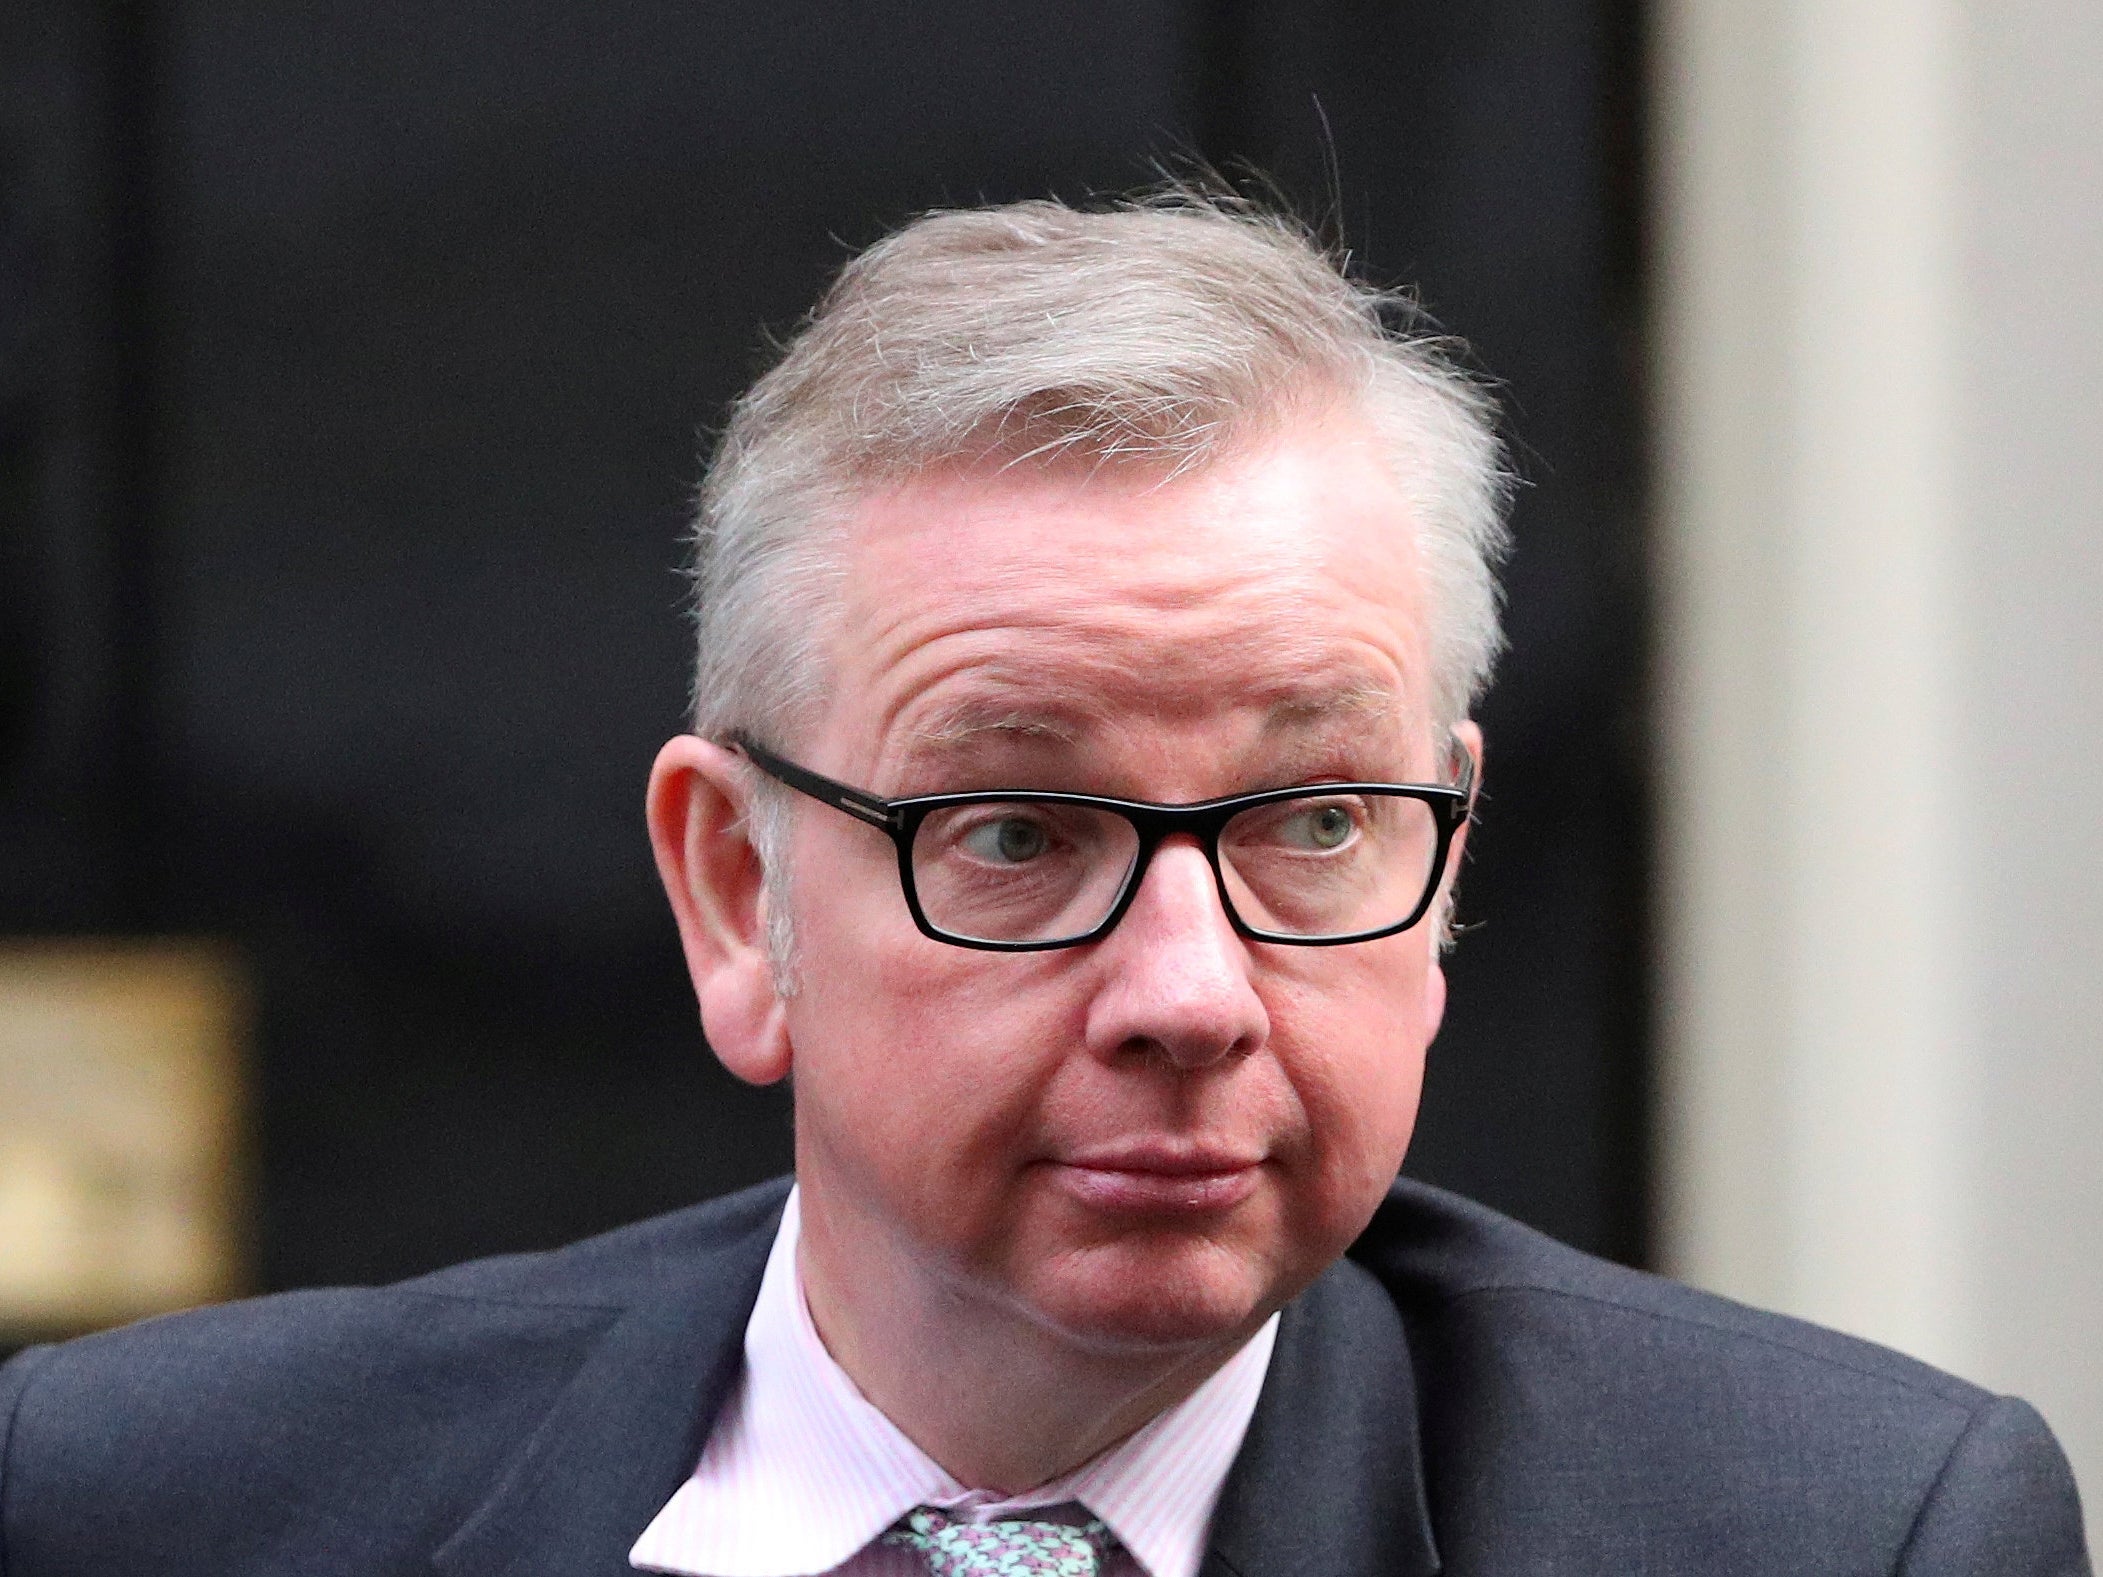 Secretary of State for Environment, Food and Rural Affairs Michael Gove has re-invigorated Tory green policies